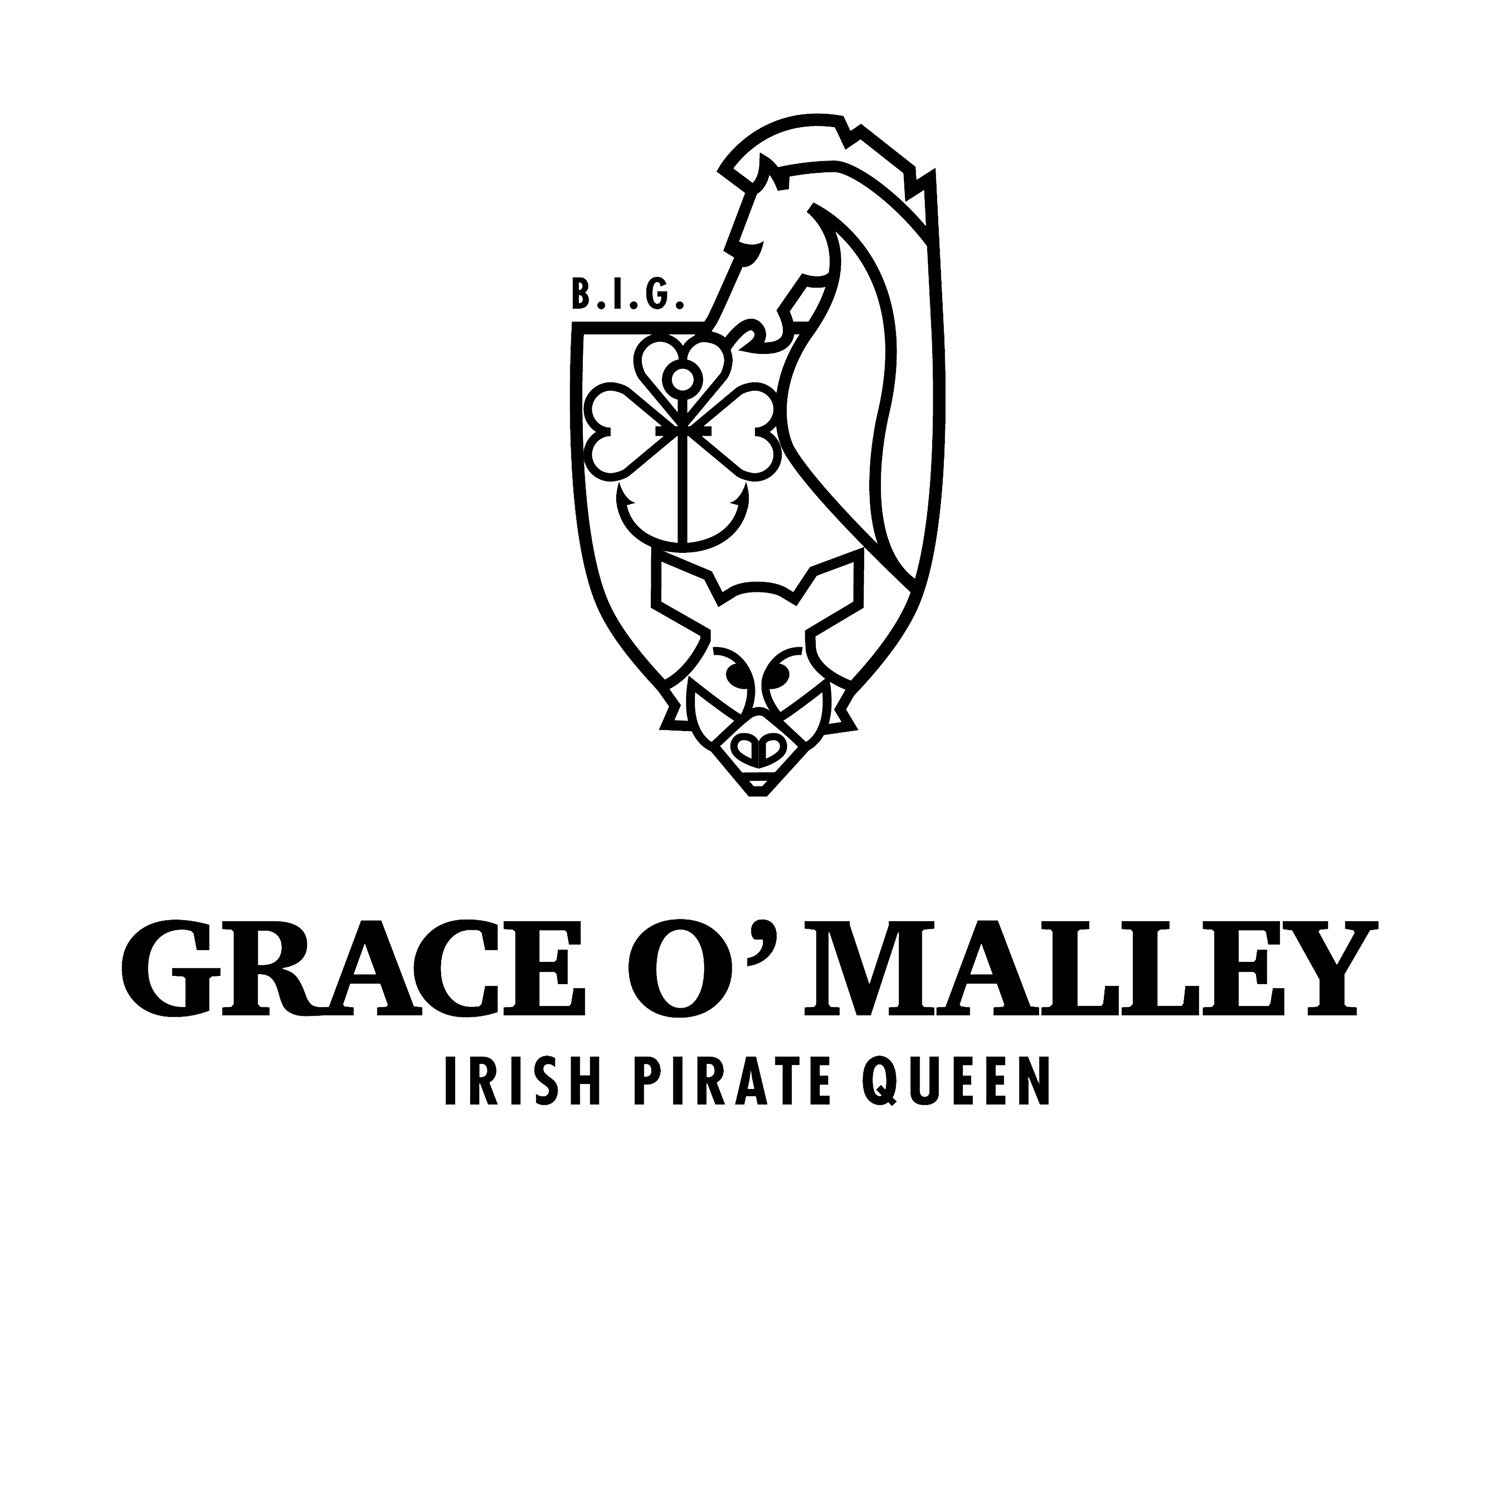 The Grace O’Malley Brand is dedicated to the legendary Irish Pirate Queen®, Granuaile® / Grace O’Malley®